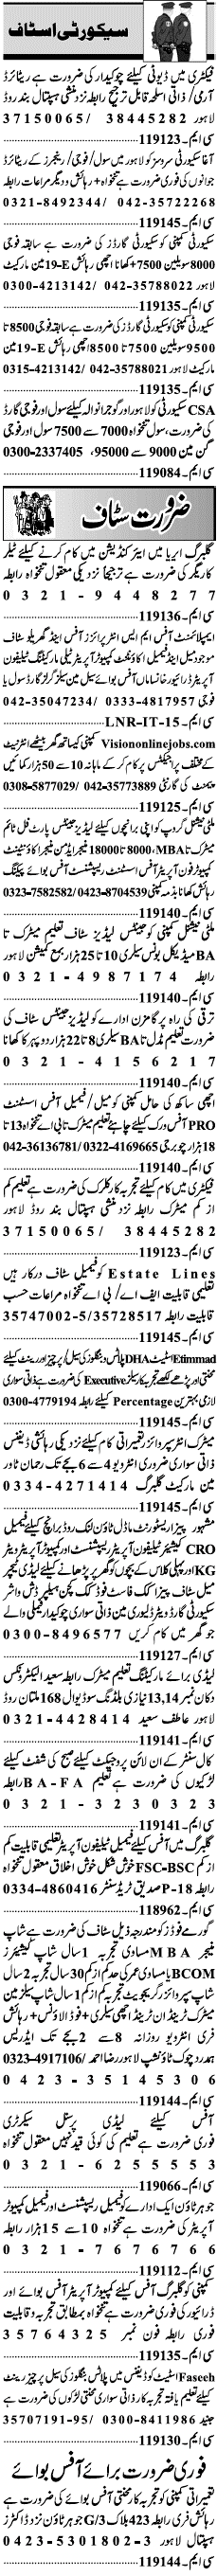 Misc. Jobs in Lahore Jang Classified 1